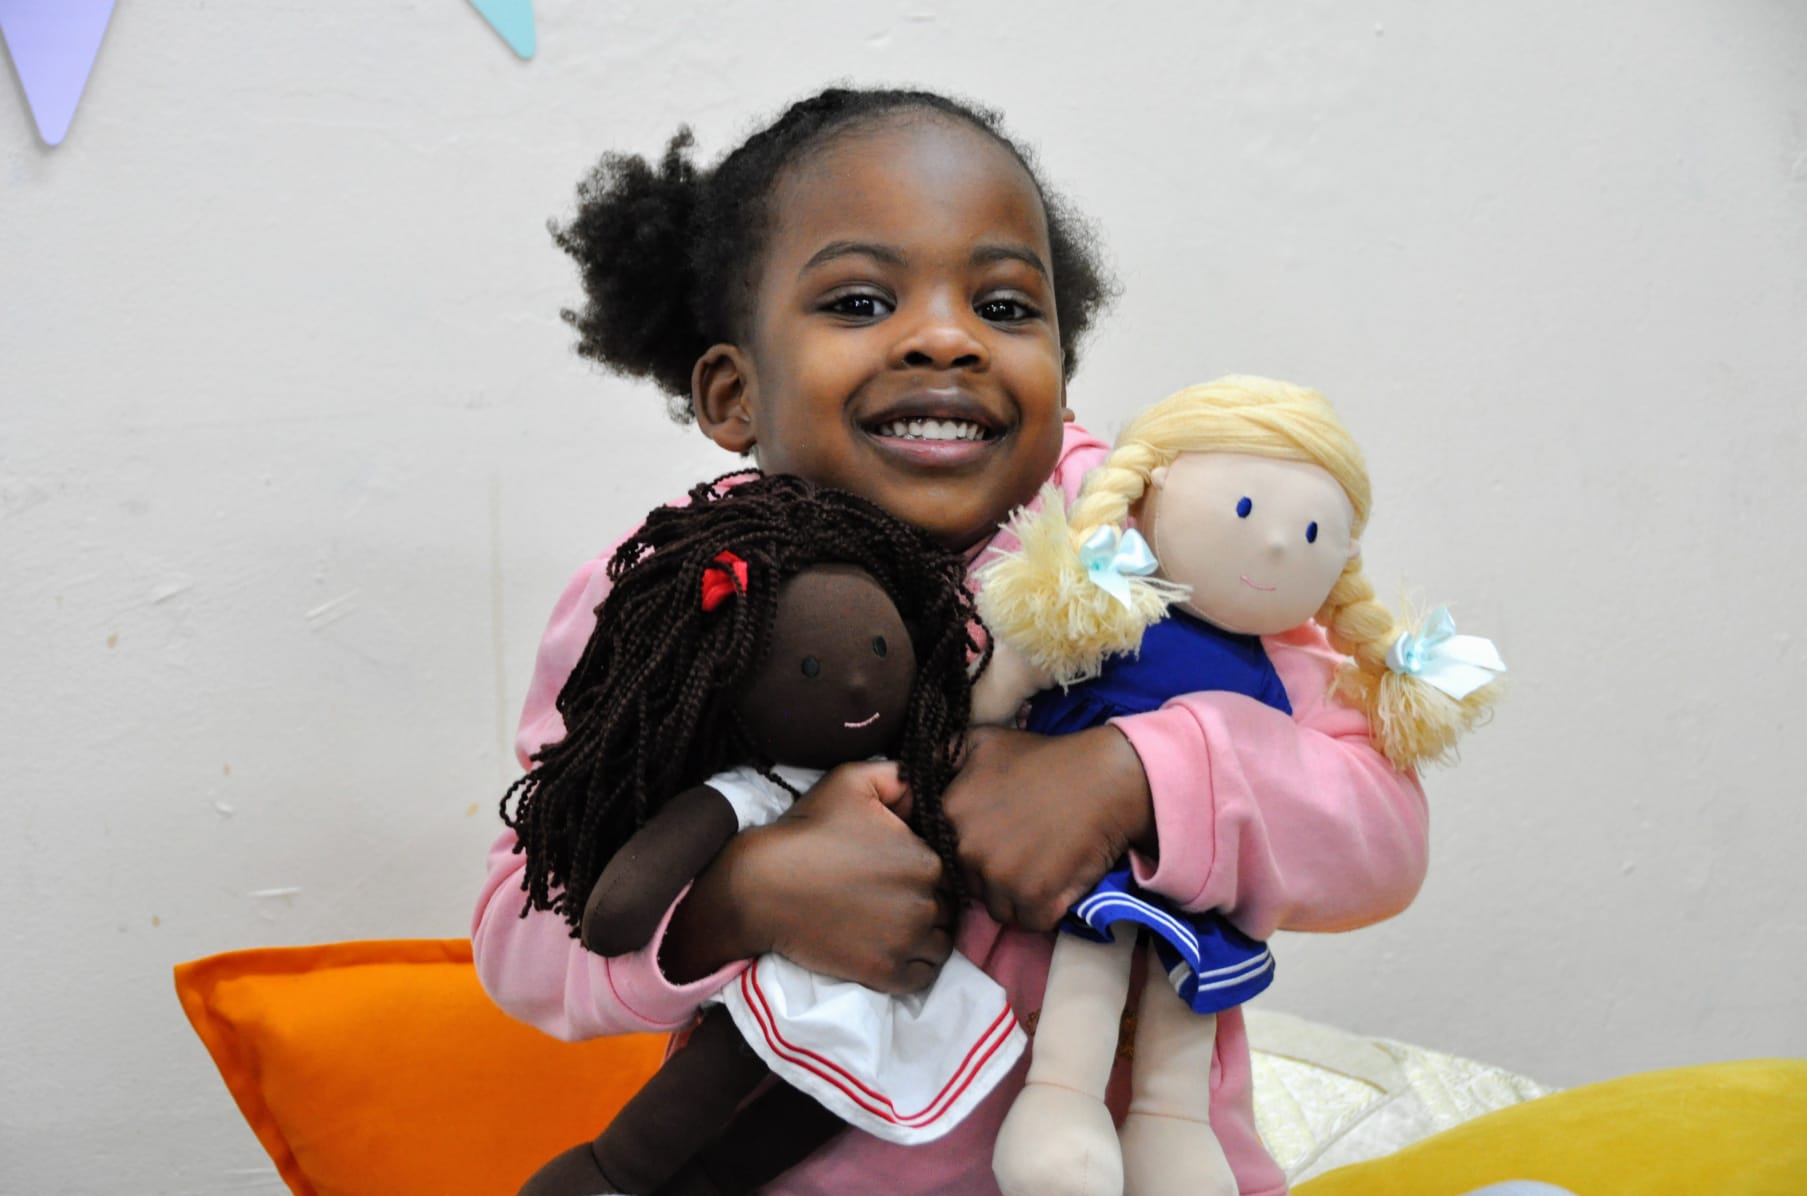 One Dear World: Multicultural Dolls for Diversity